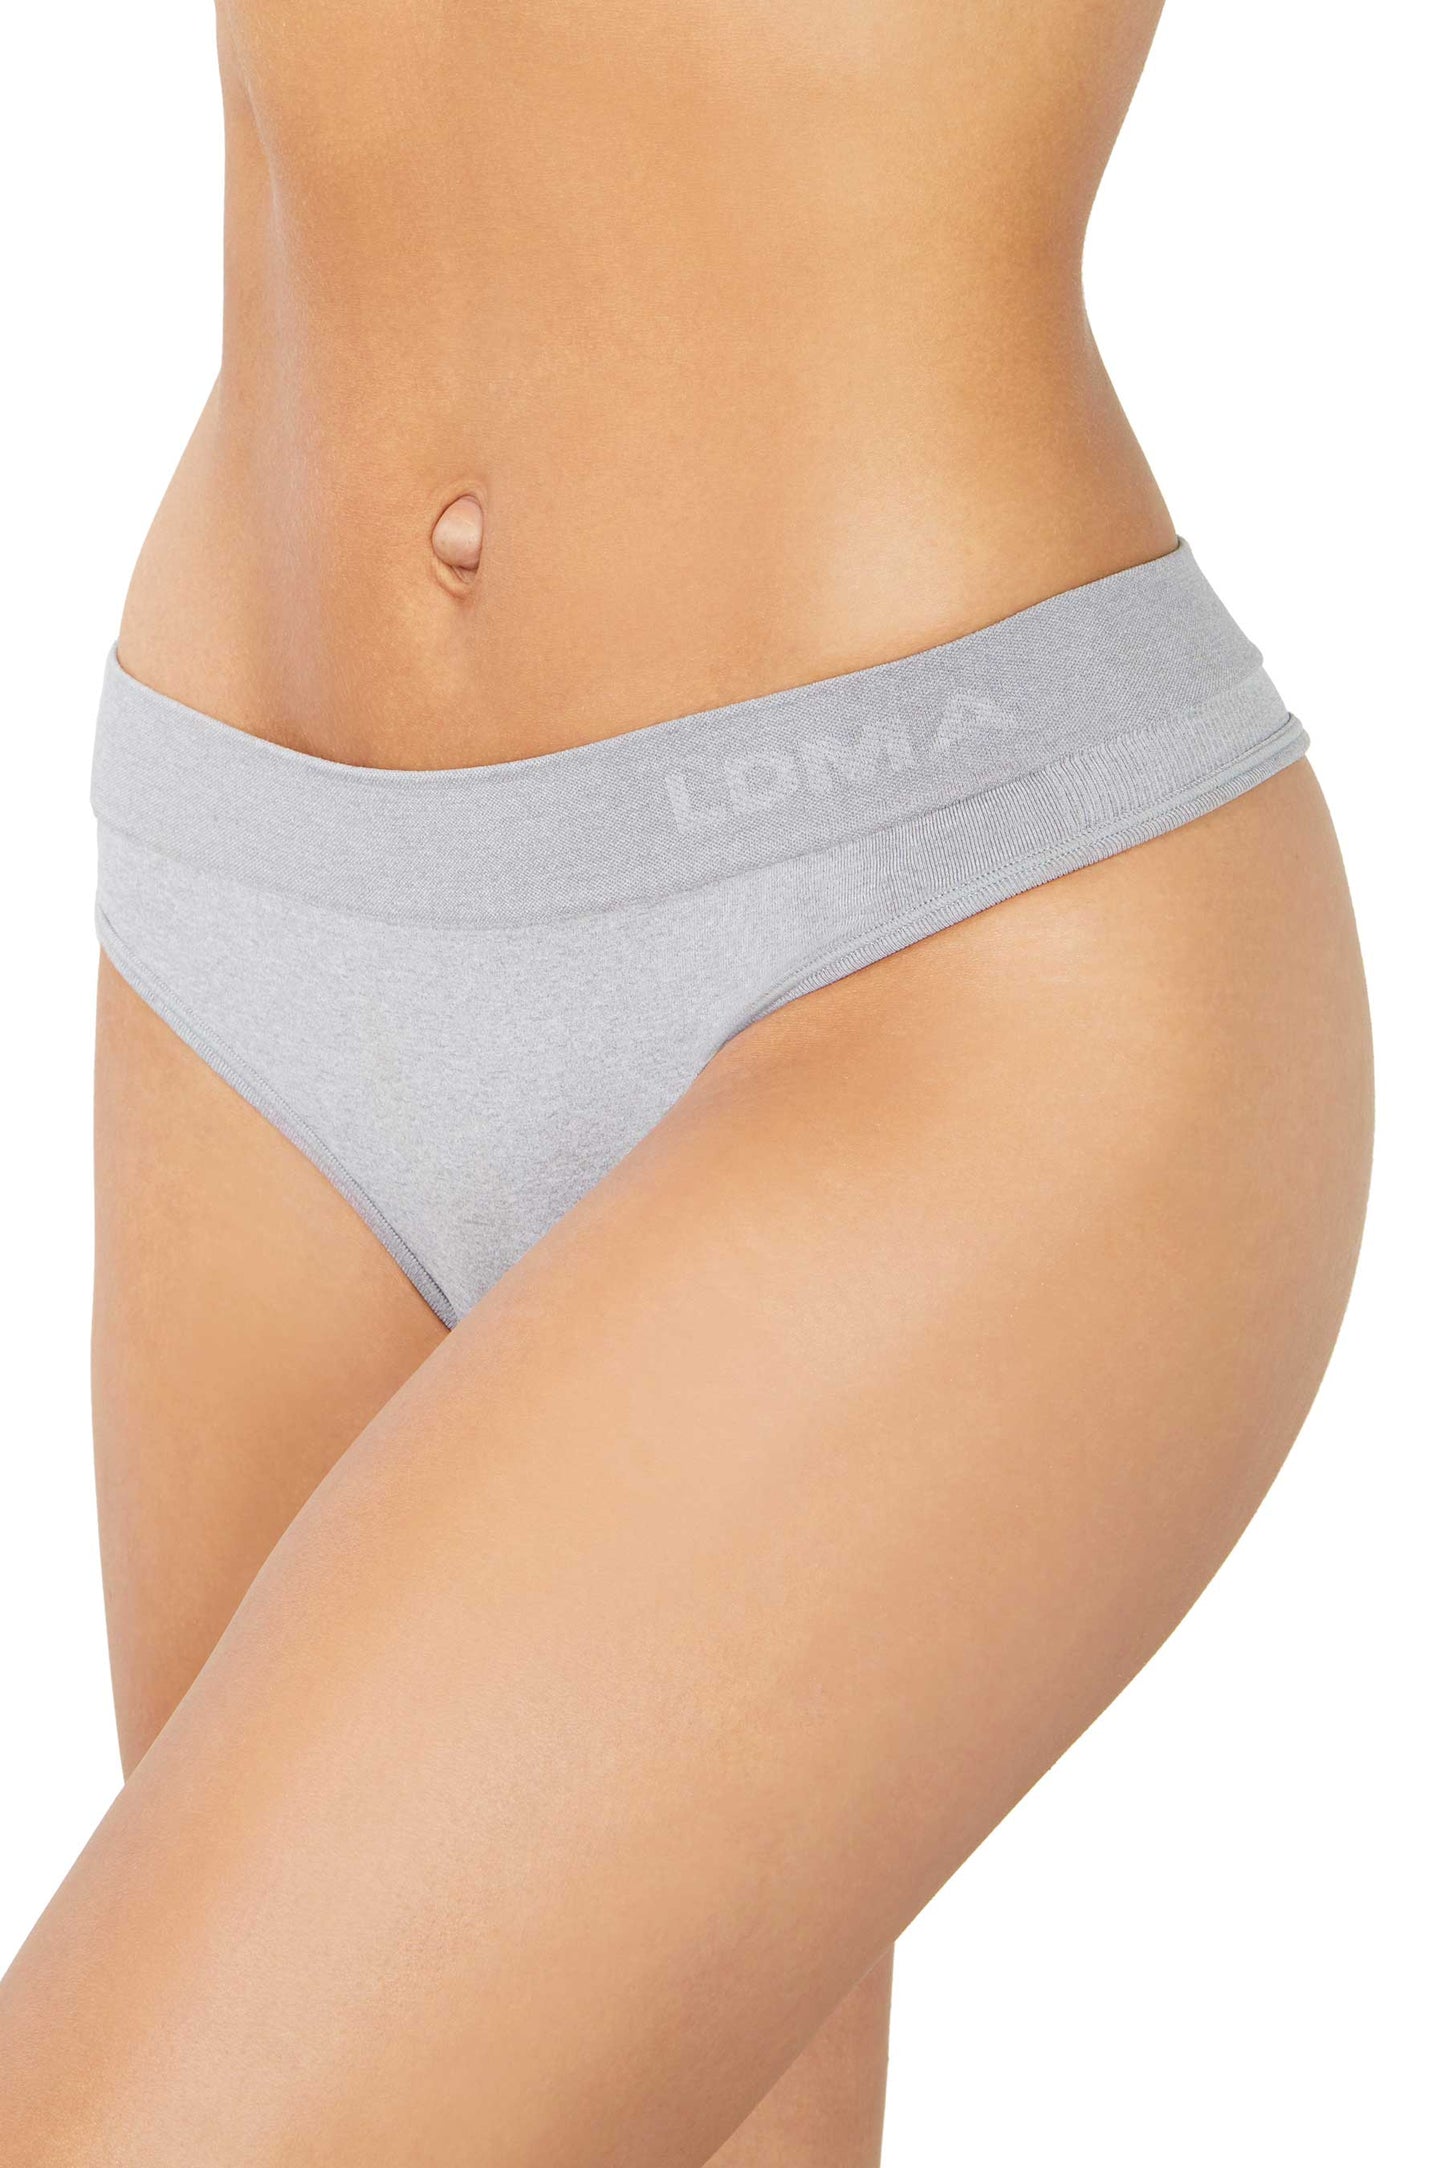 Low Hide Thong in Heather Grey